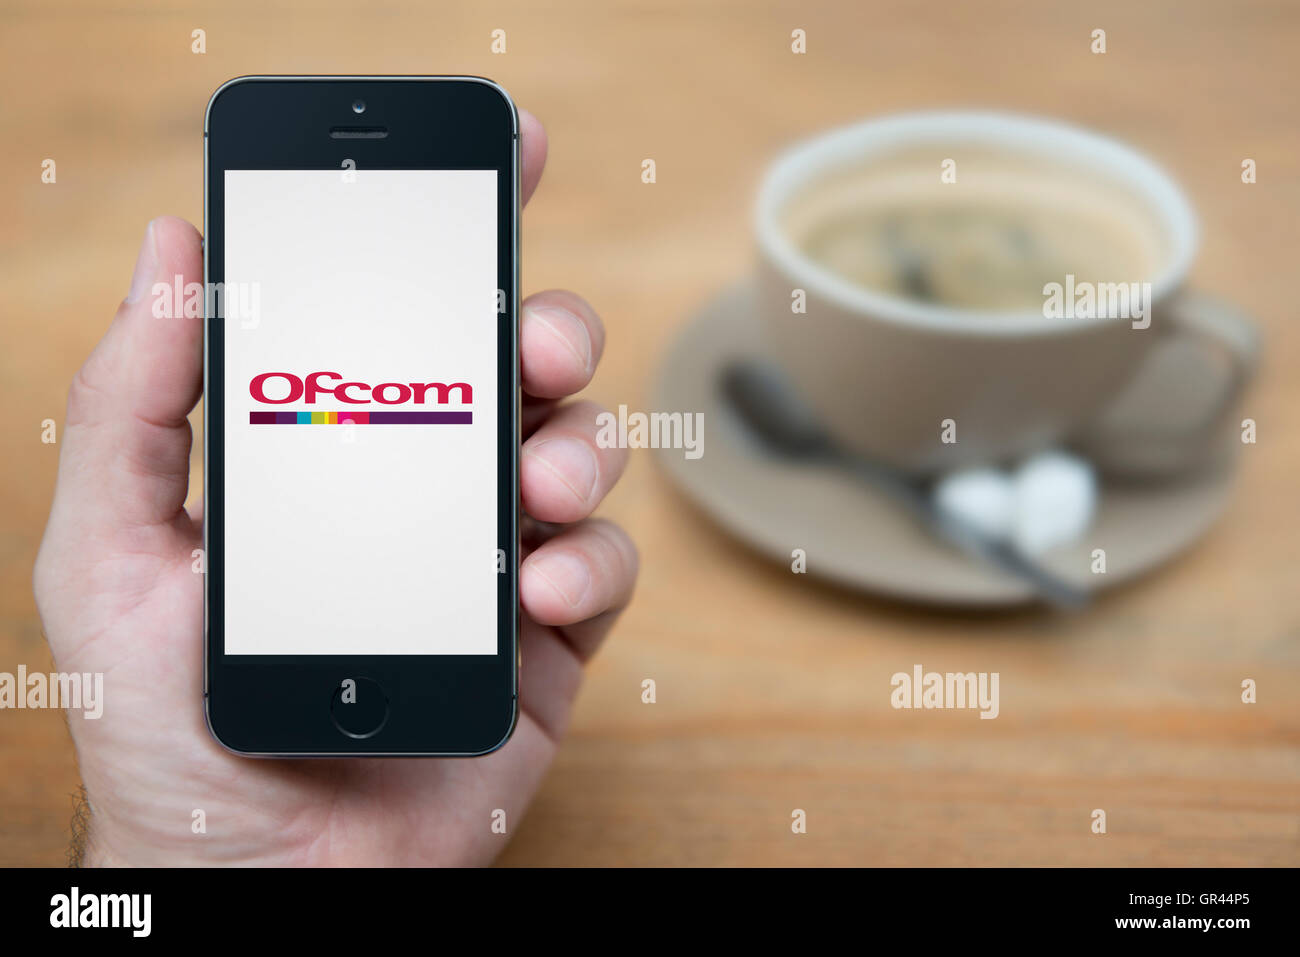 A man looks at his iPhone which displays the Office of Communications Ofcom logo (Editorial use only). Stock Photo